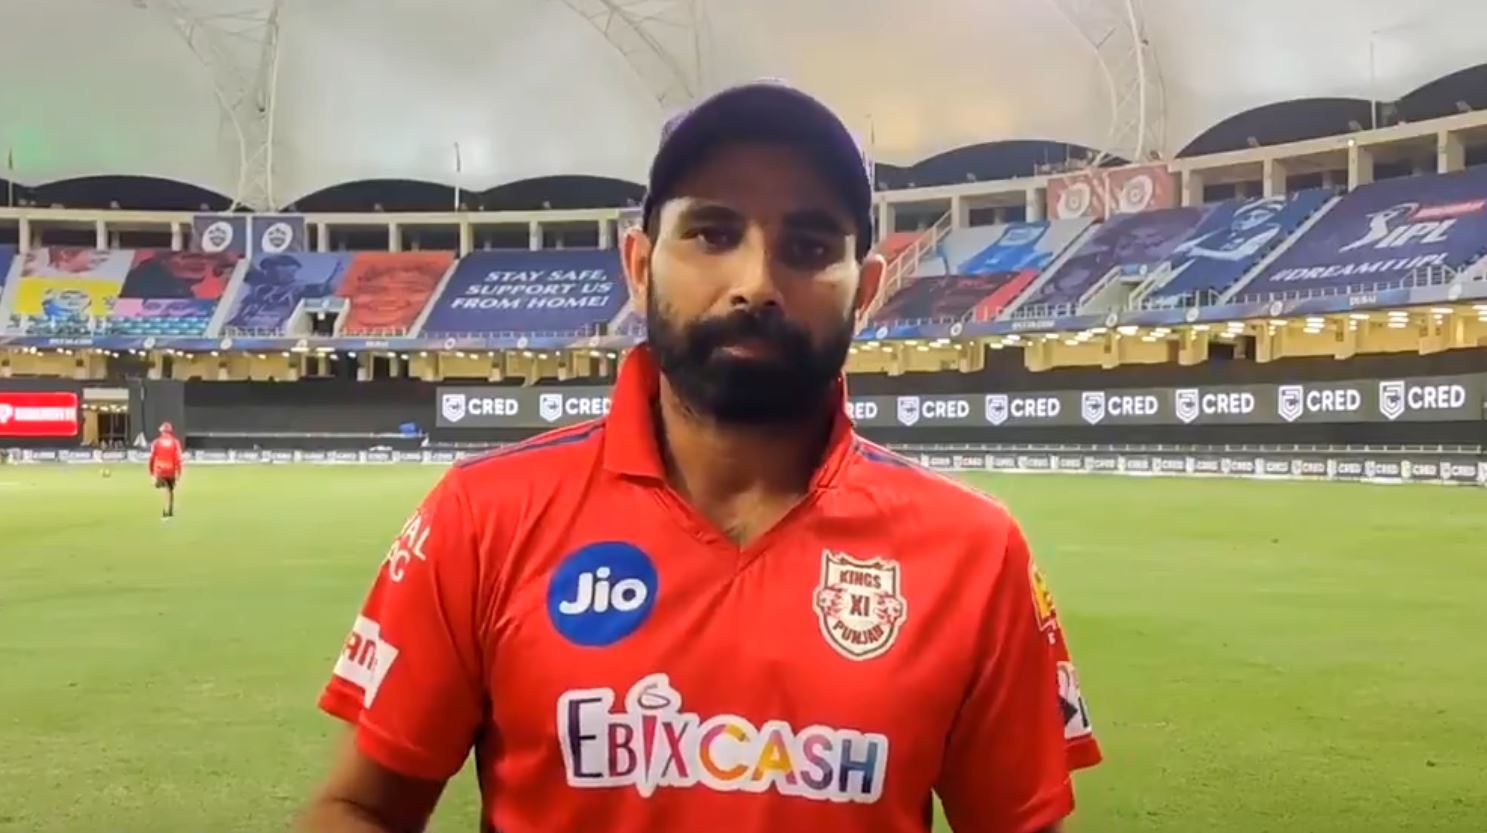 Mohammad Shami has four wickets in two matches of IPL 2020 | KXIP Twitter